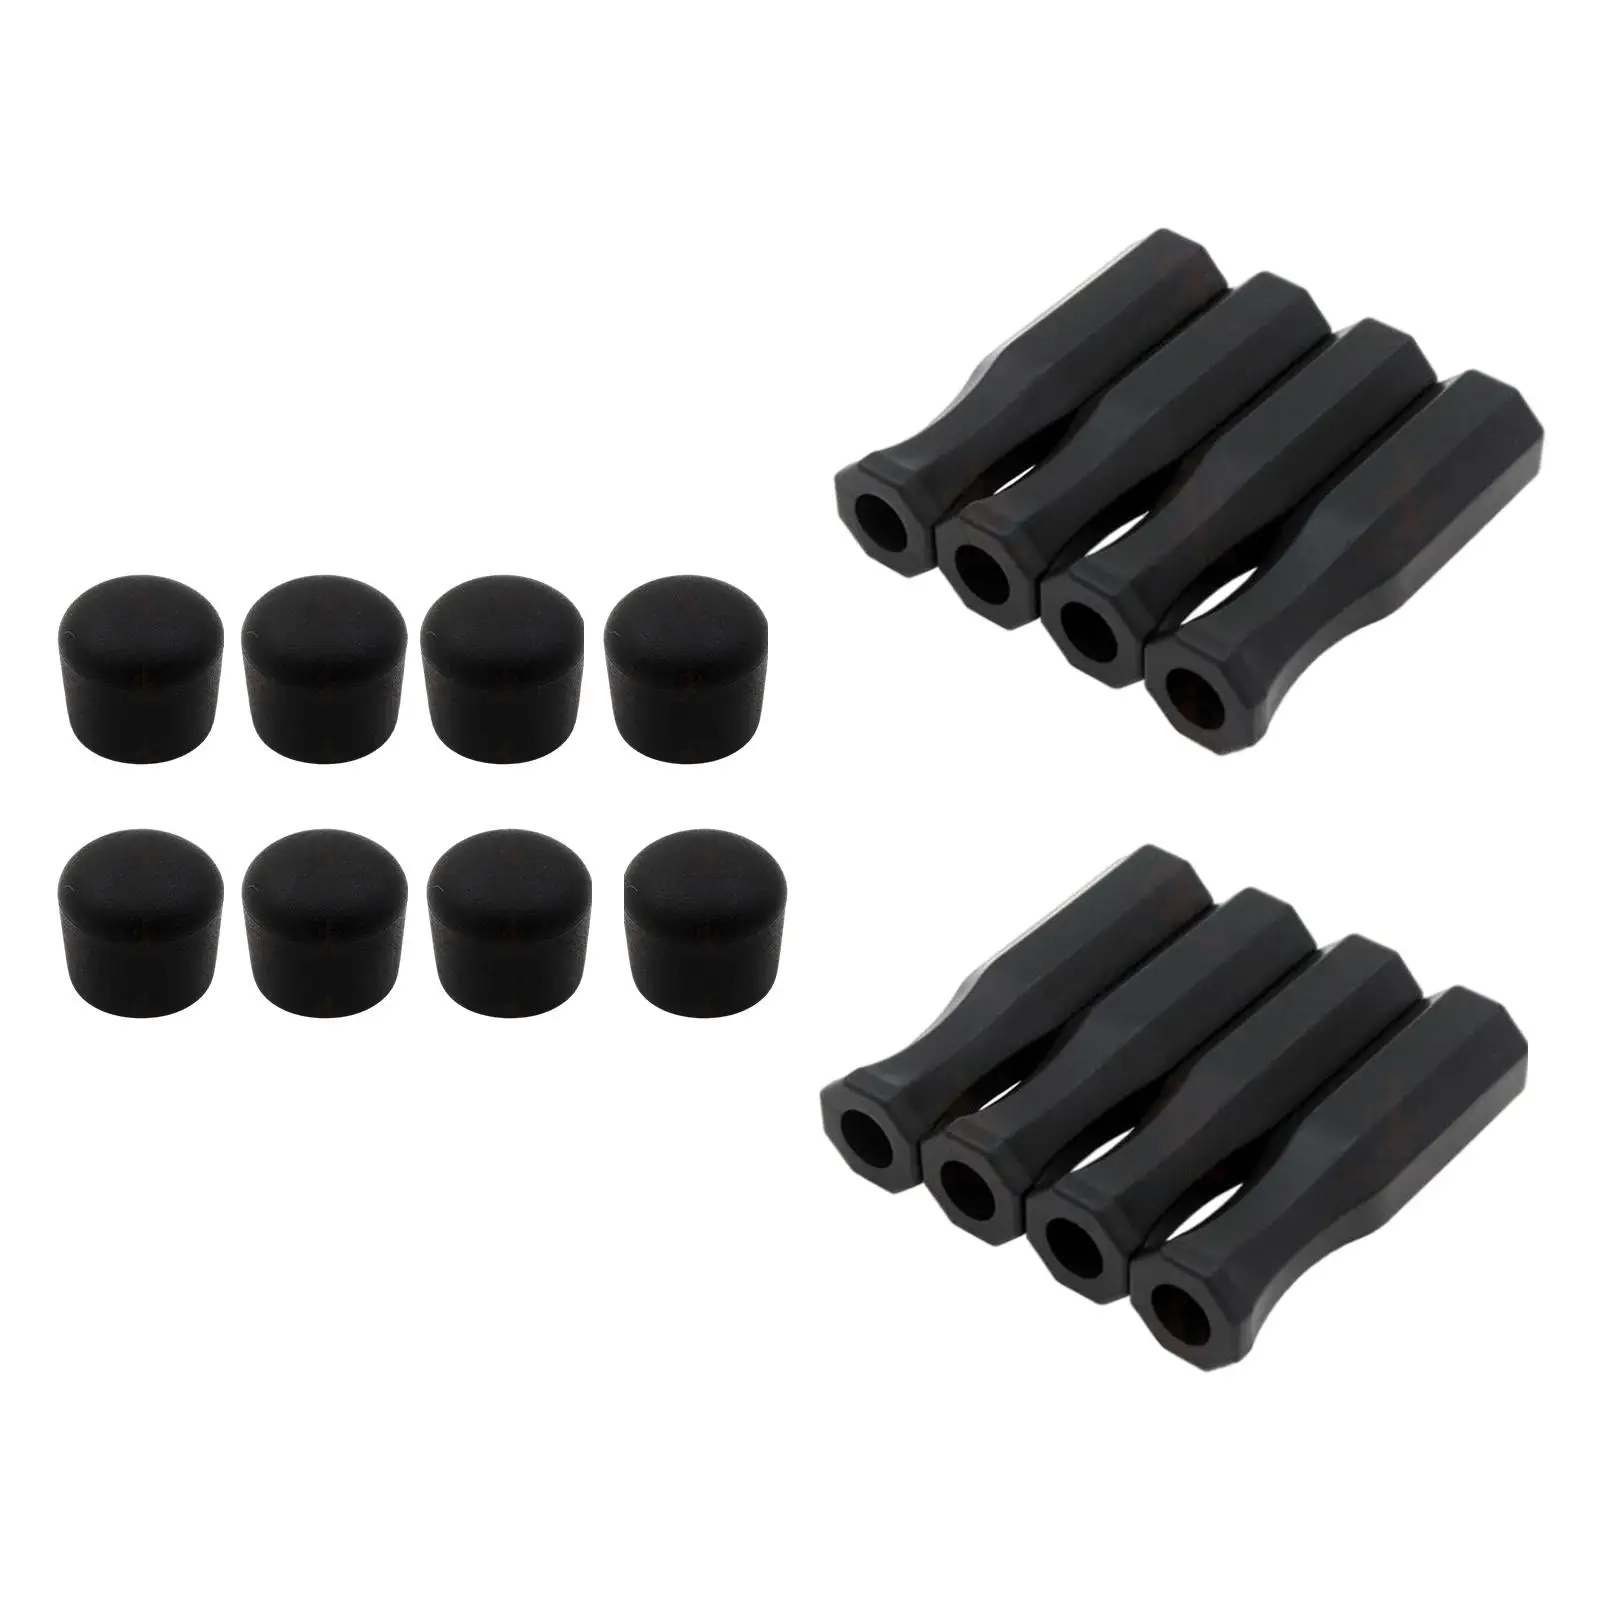 16 Pieces Octagonal Handles and Safety End Caps Octagonal Handles for Children